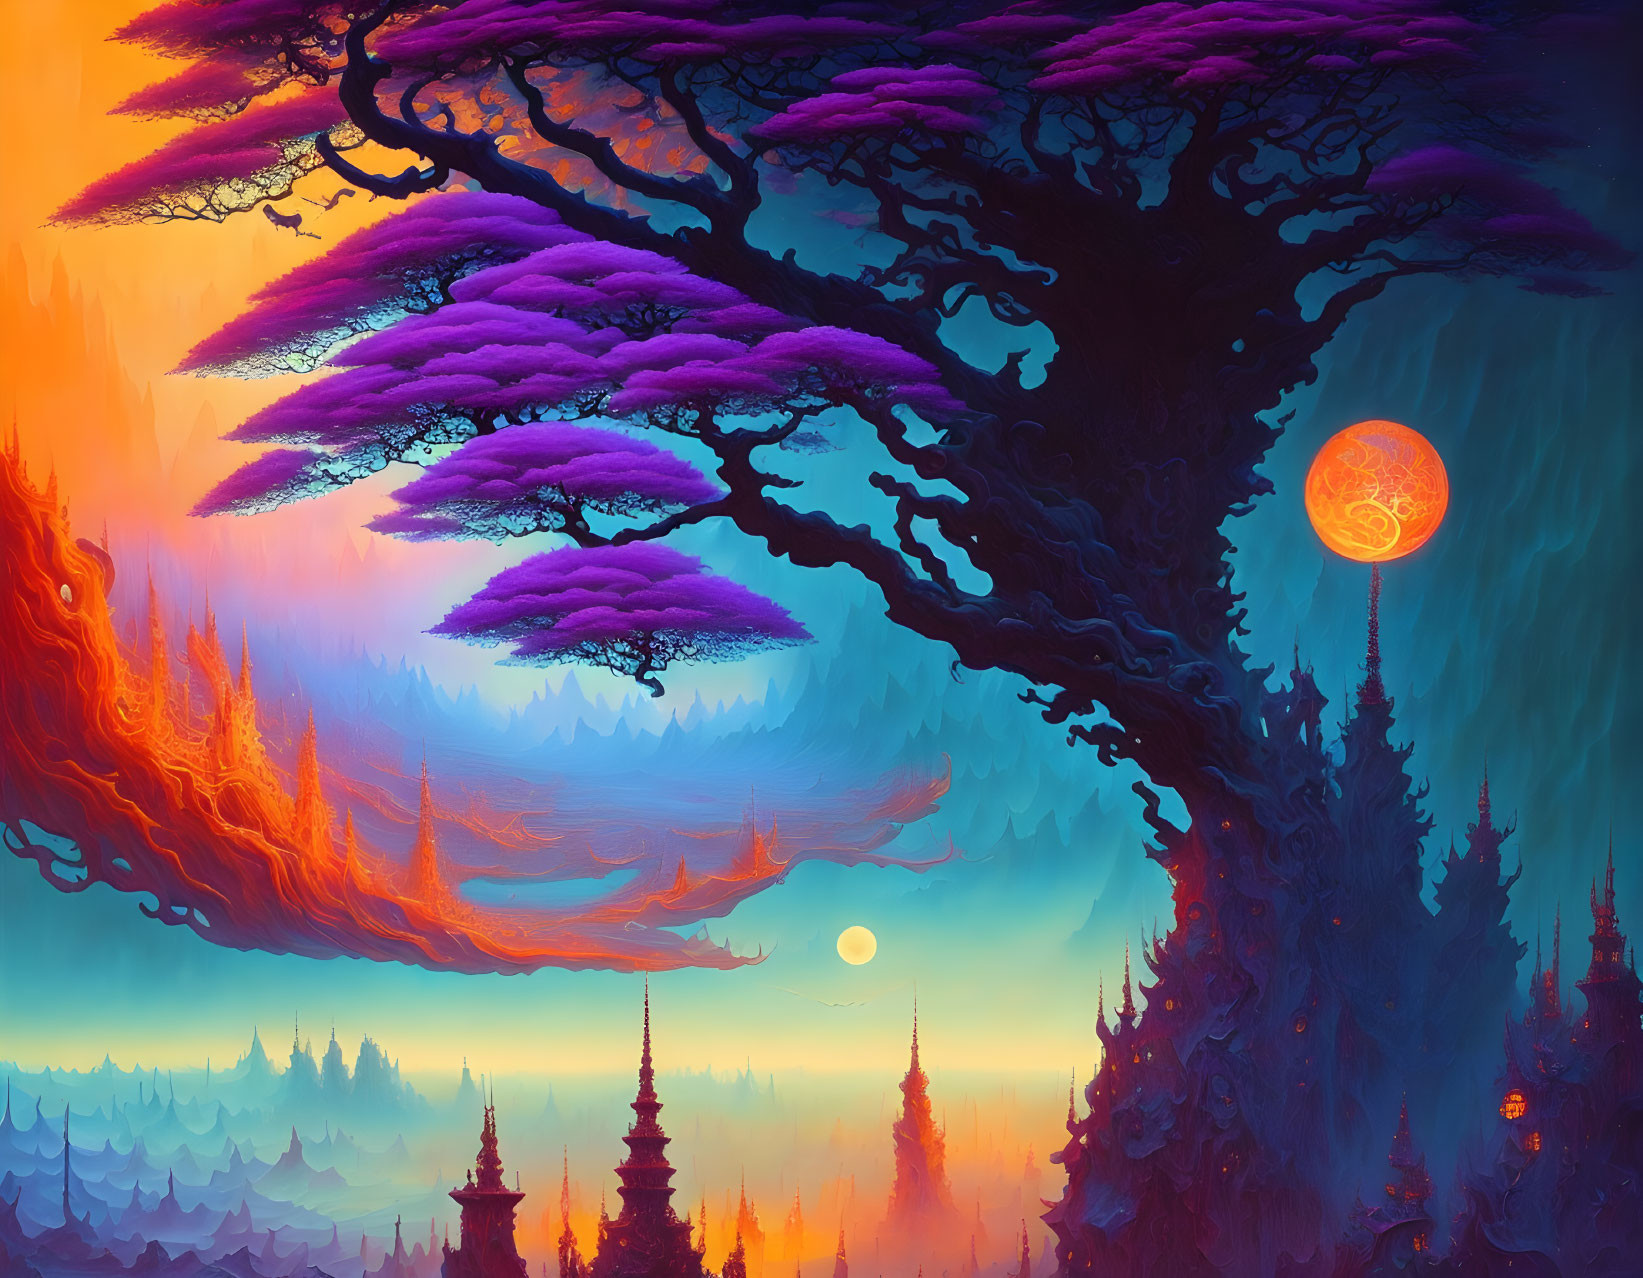 Fantasy landscape with large purple tree and fiery orange moon